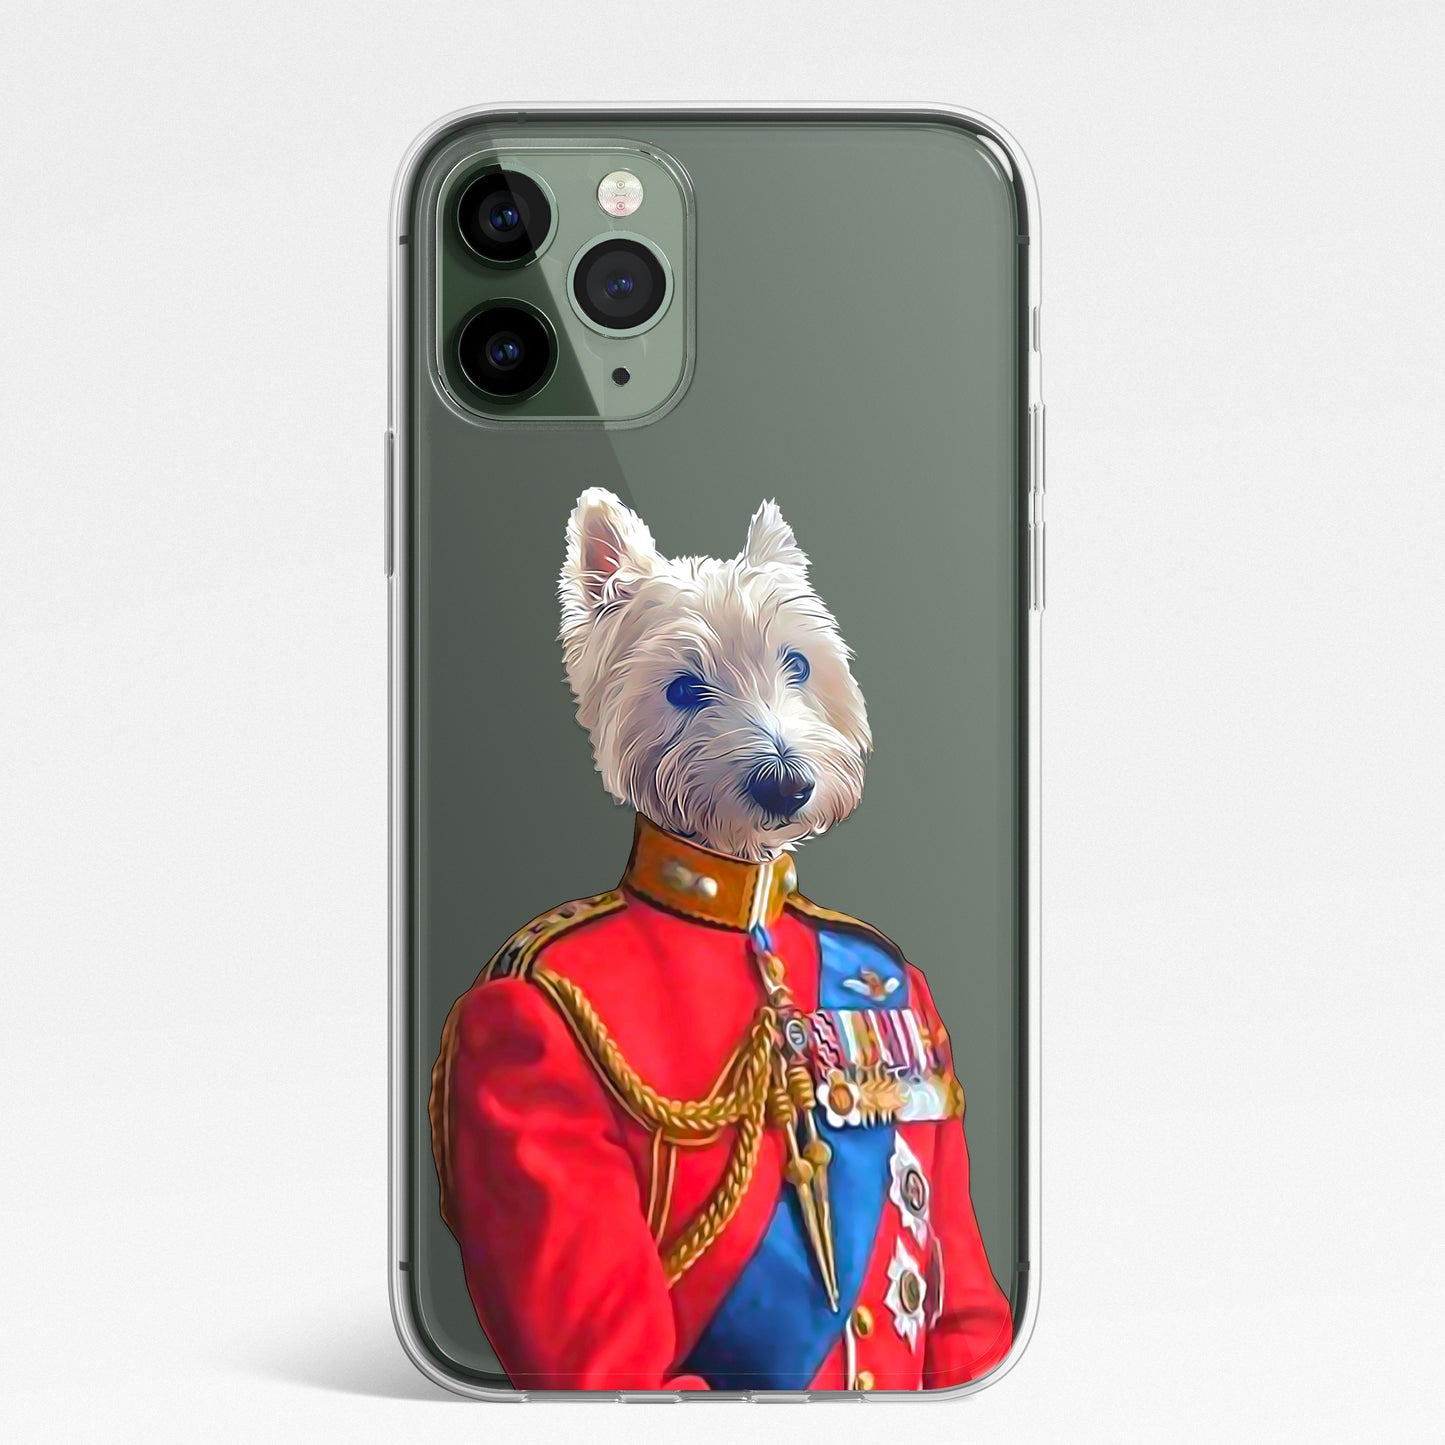 PET Portrait Royal Queen King Princess Custom CLEAR Phone Cover Case for iPhone